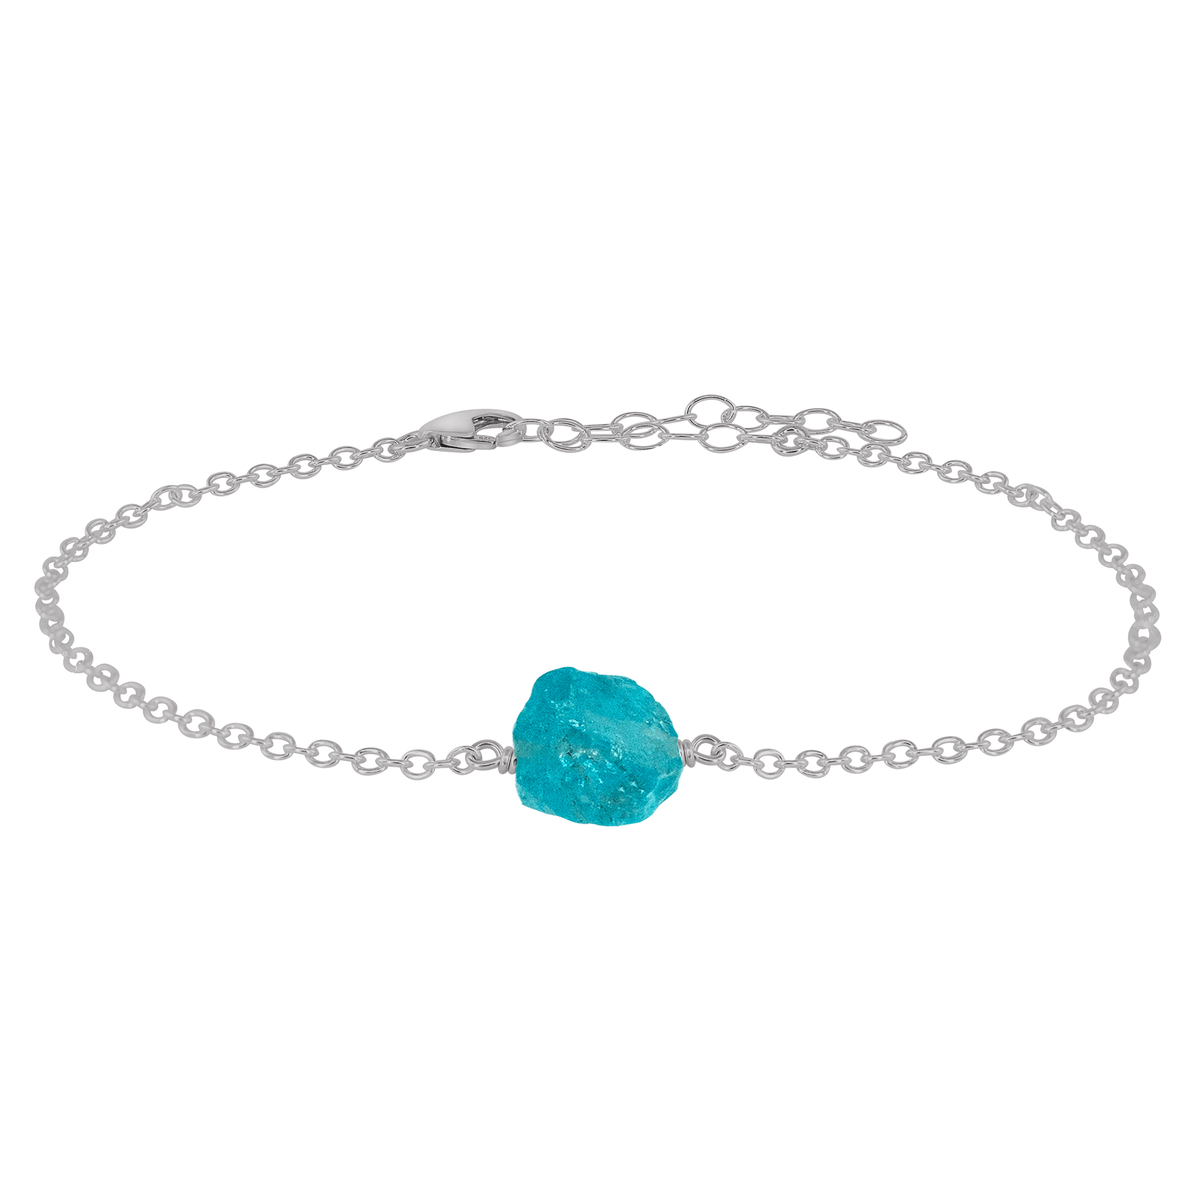 Raw Nugget Anklet - Apatite - Stainless Steel - Luna Tide Handmade Jewellery